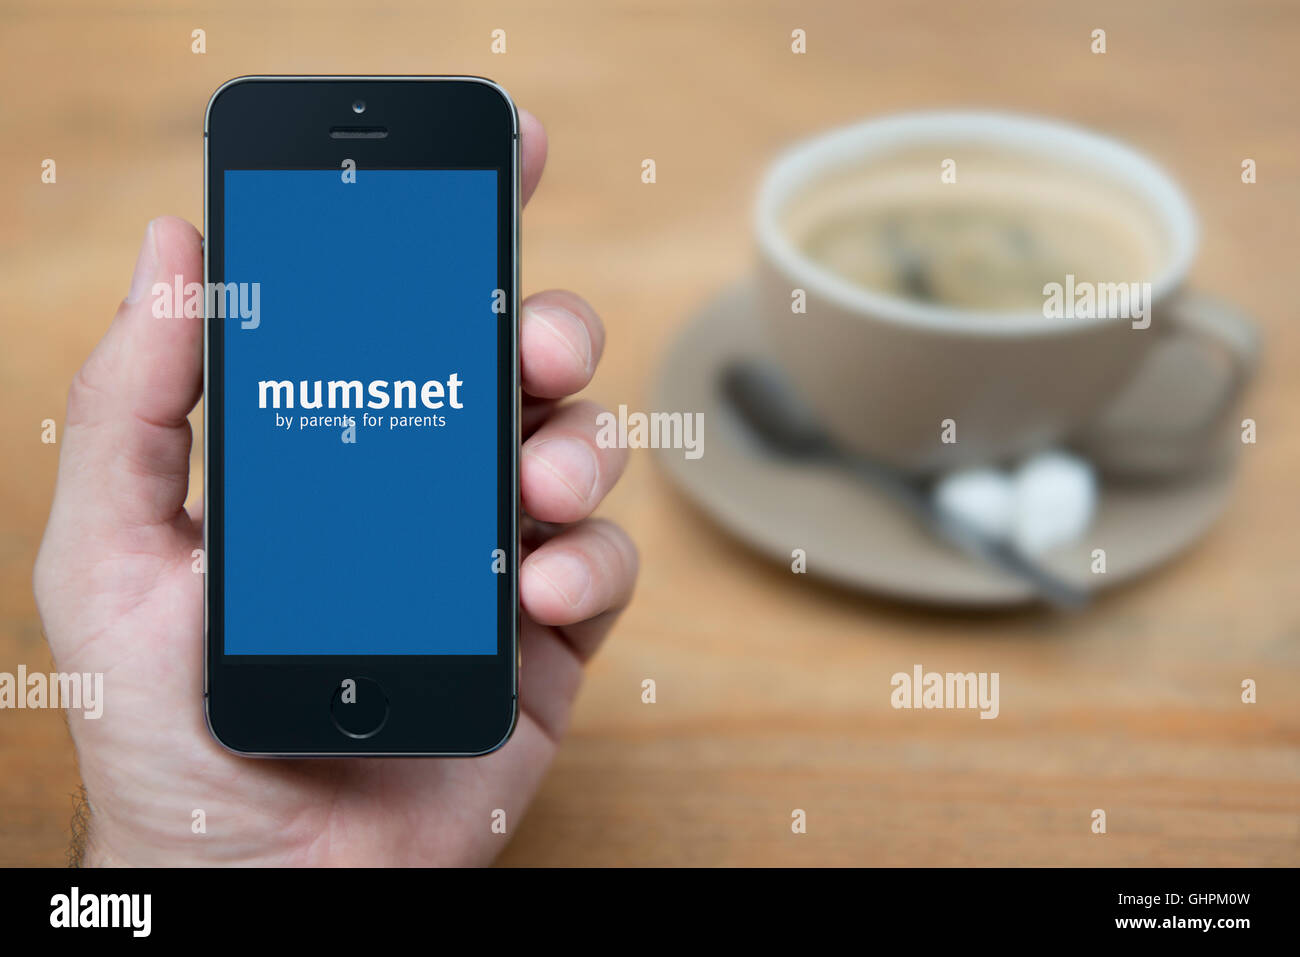 A man looks at his iPhone which displays the Mumsnet logo, while sat with a cup of coffee (Editorial use only). Stock Photo